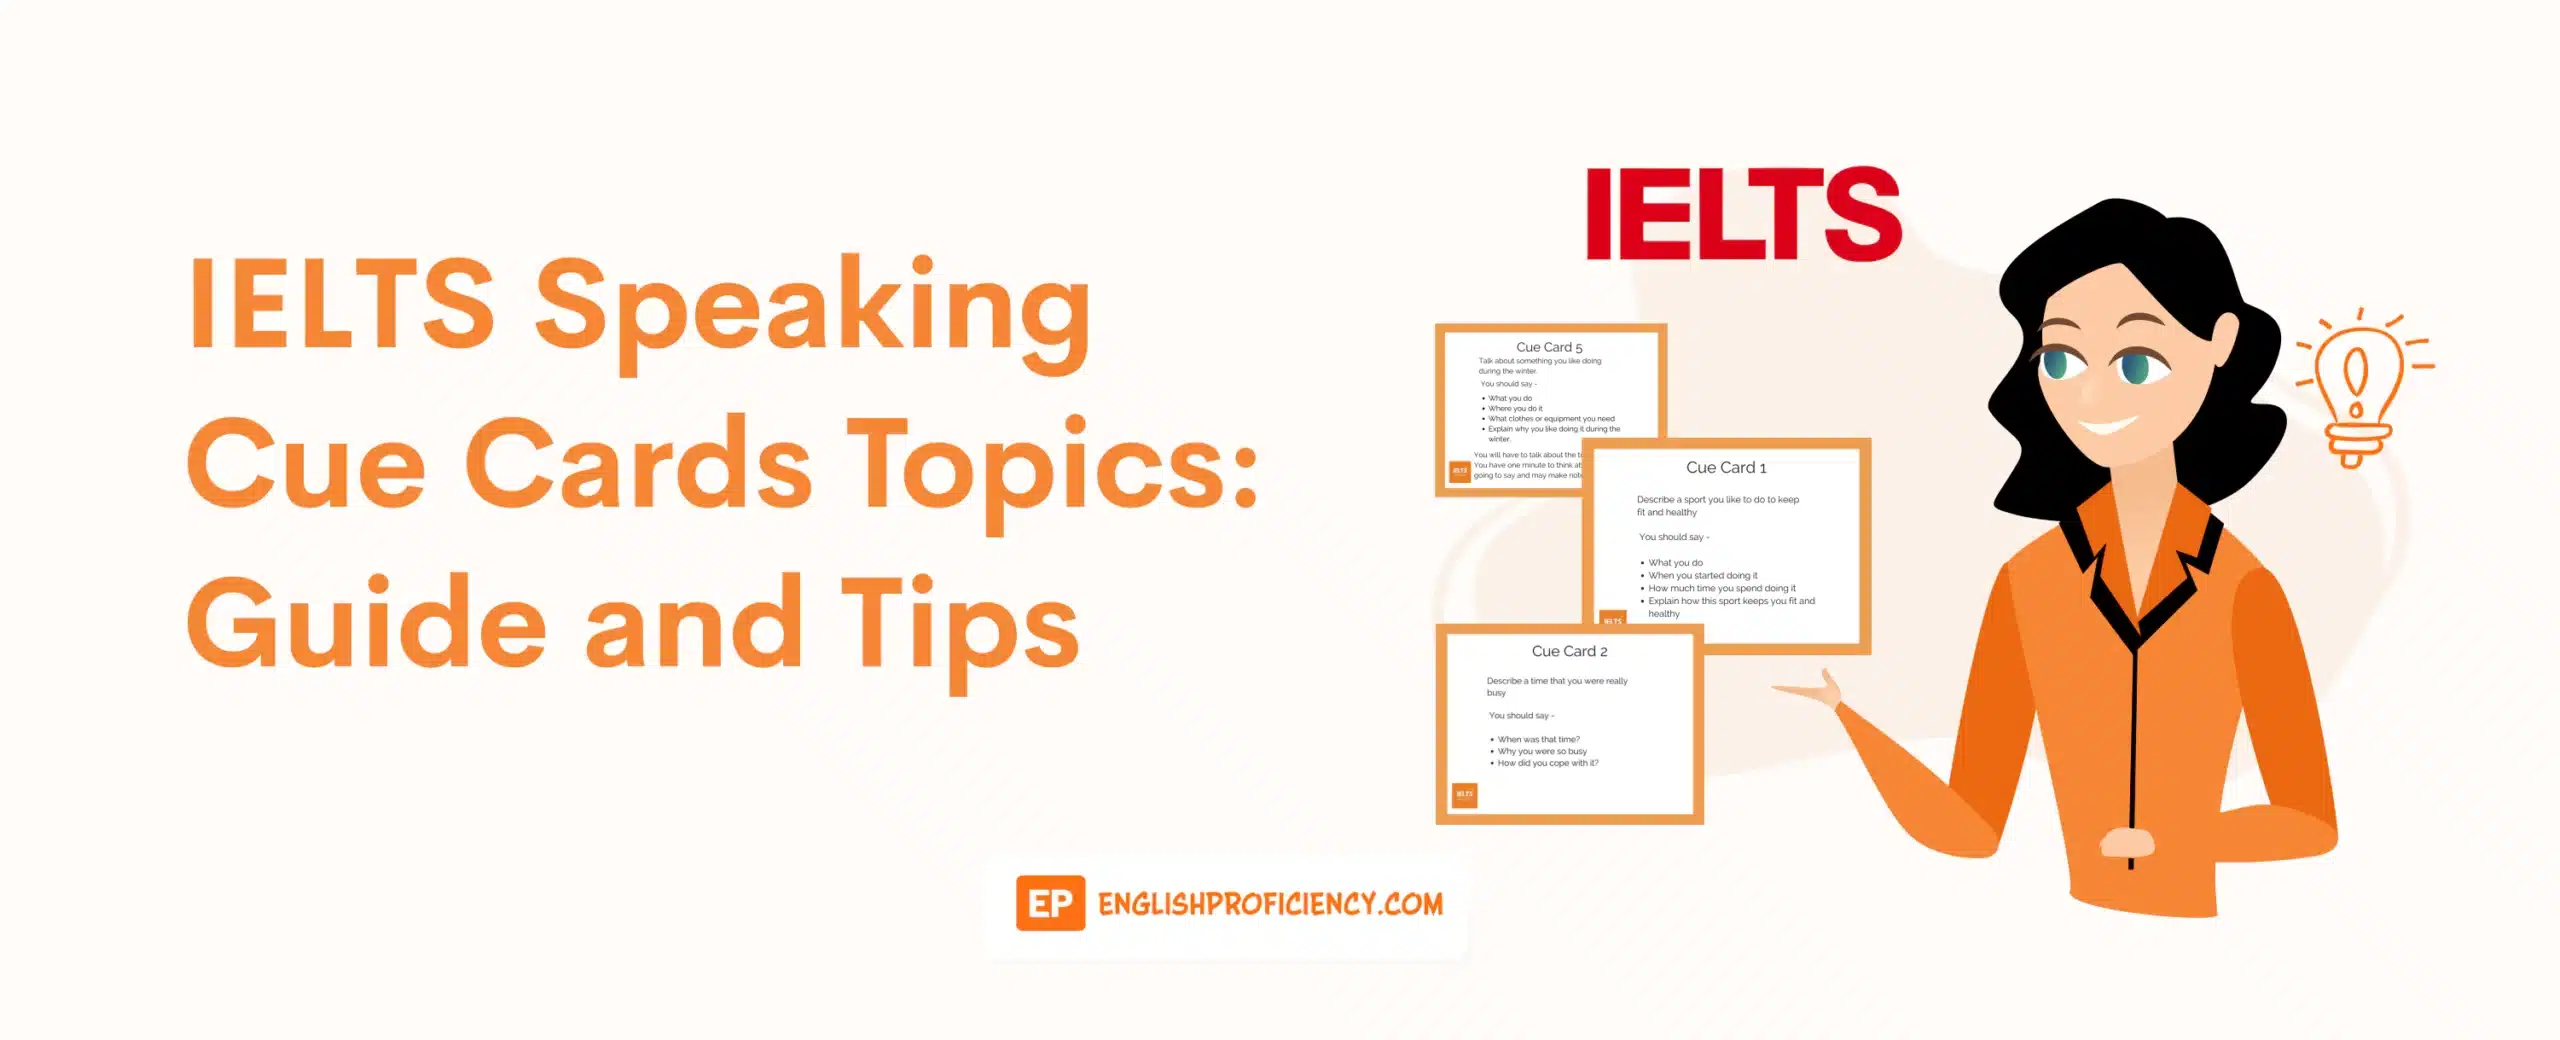 IELTS Speaking Cue Cards Topics Guide and Tips